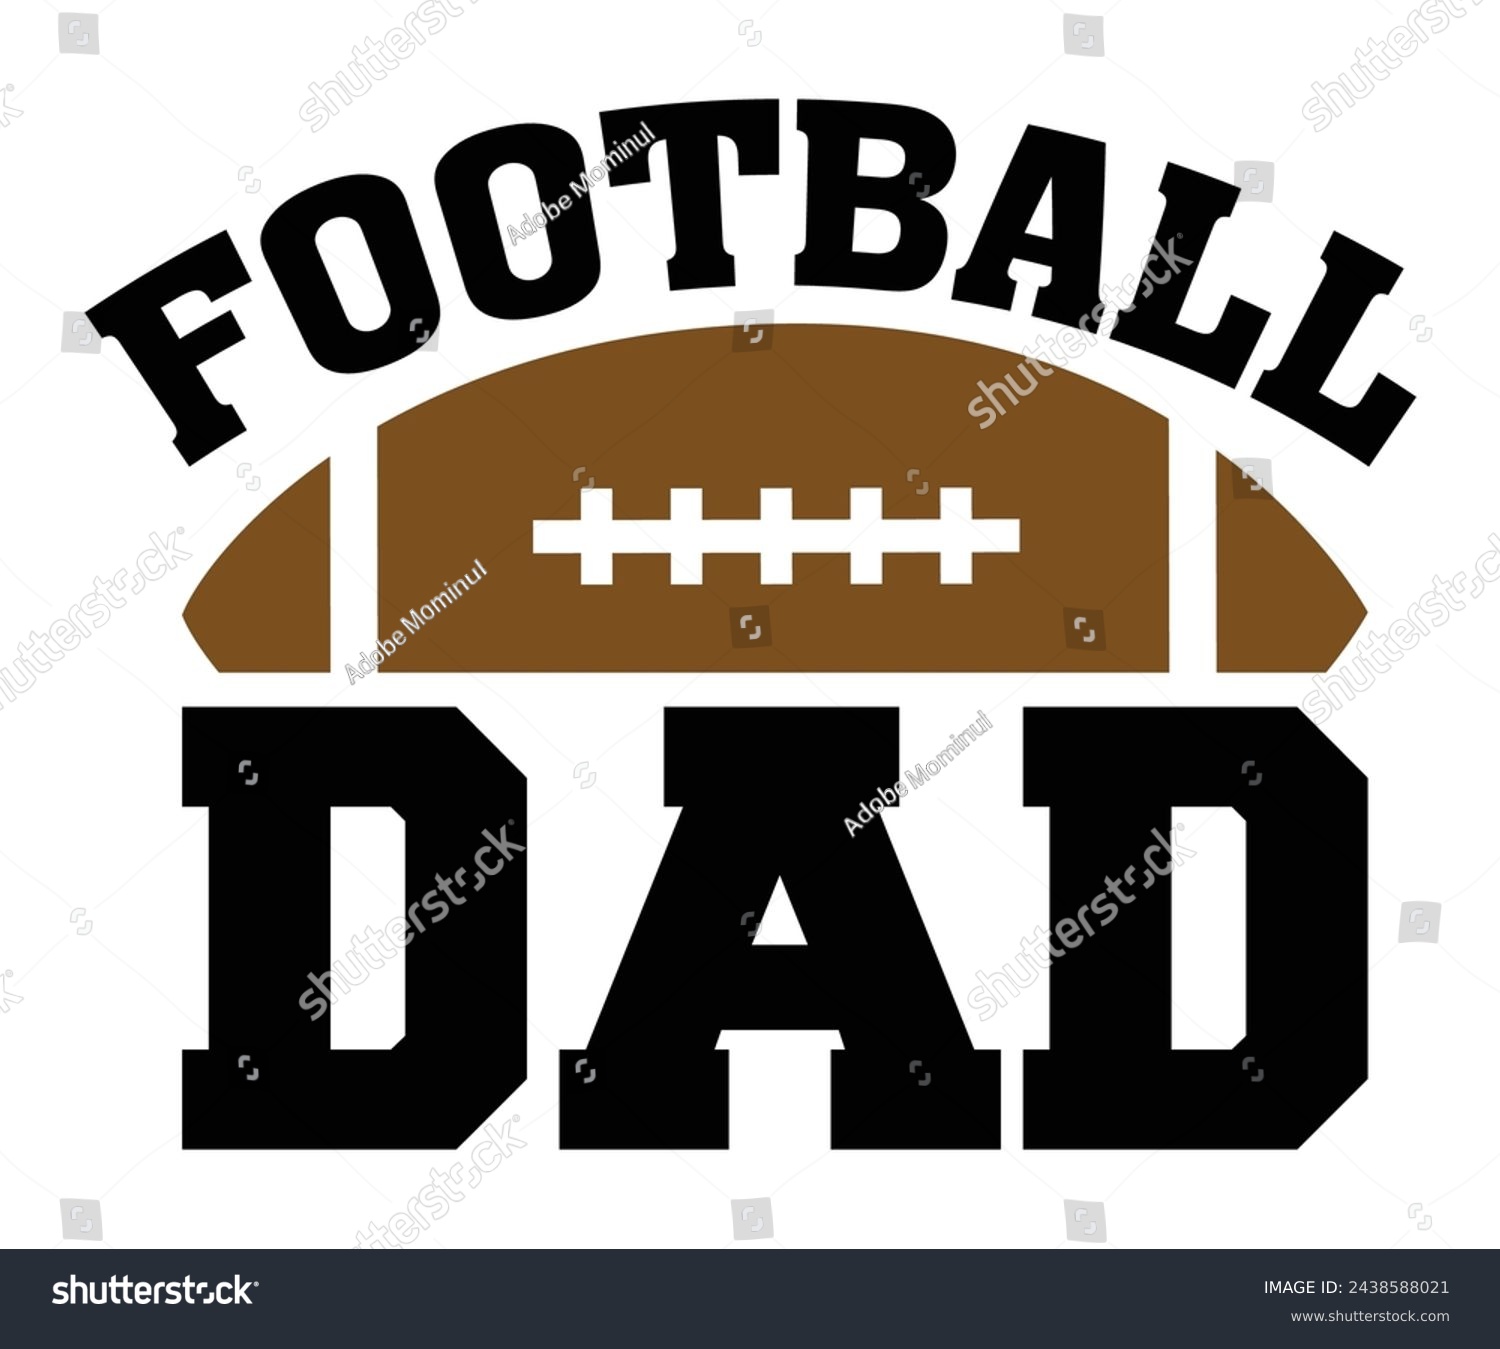 SVG of Football Dad,Football Svg,Football Player Svg,Game Day Shirt,Football Quotes Svg,American Football Svg,Soccer Svg,Cut File,Commercial use svg